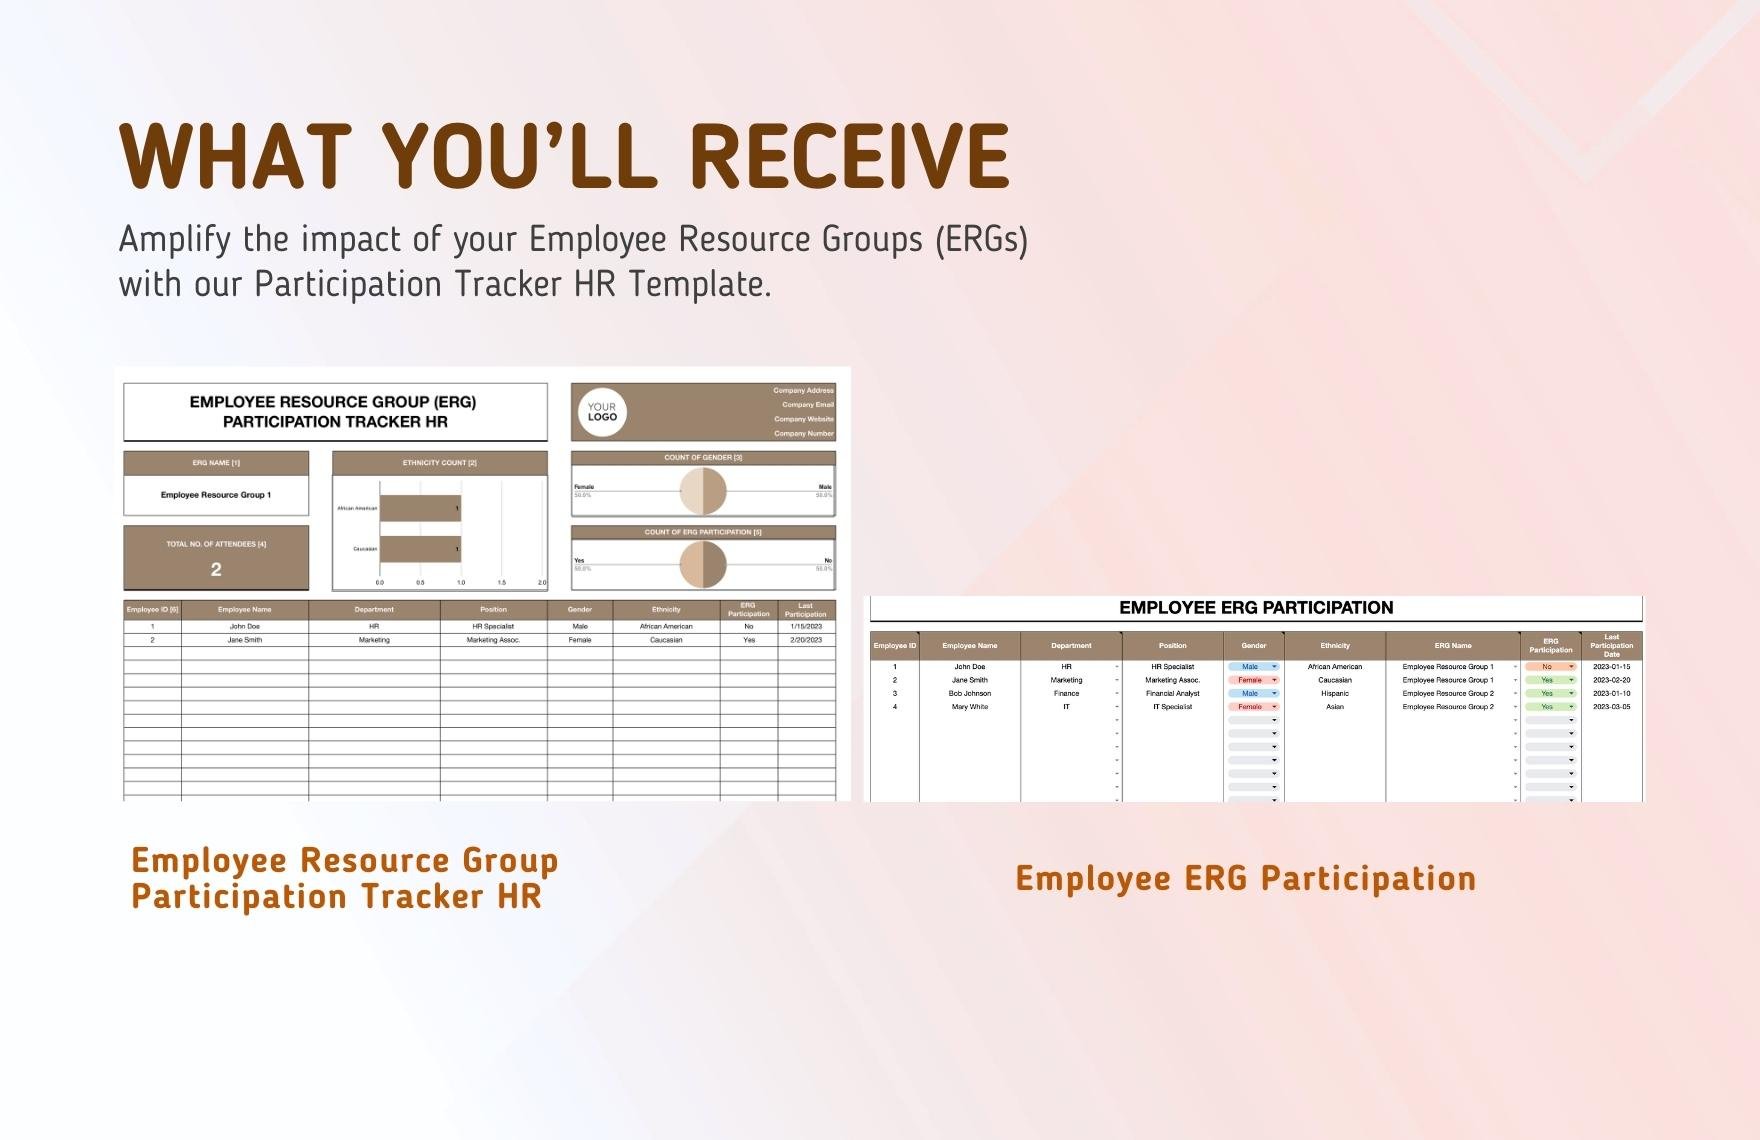 Employee Resource Group (ERG) Participation Tracker HR Template